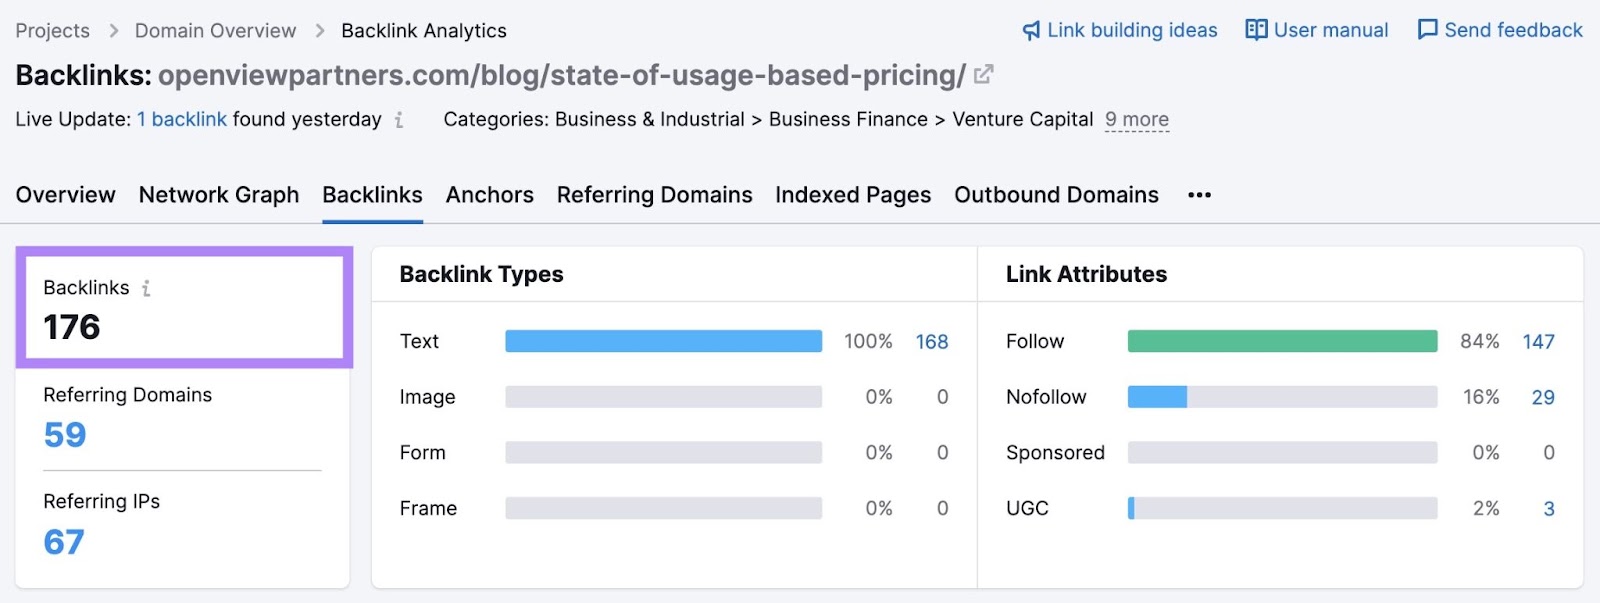 pricing study from OpenView Venture Partners has over 170 backlinks